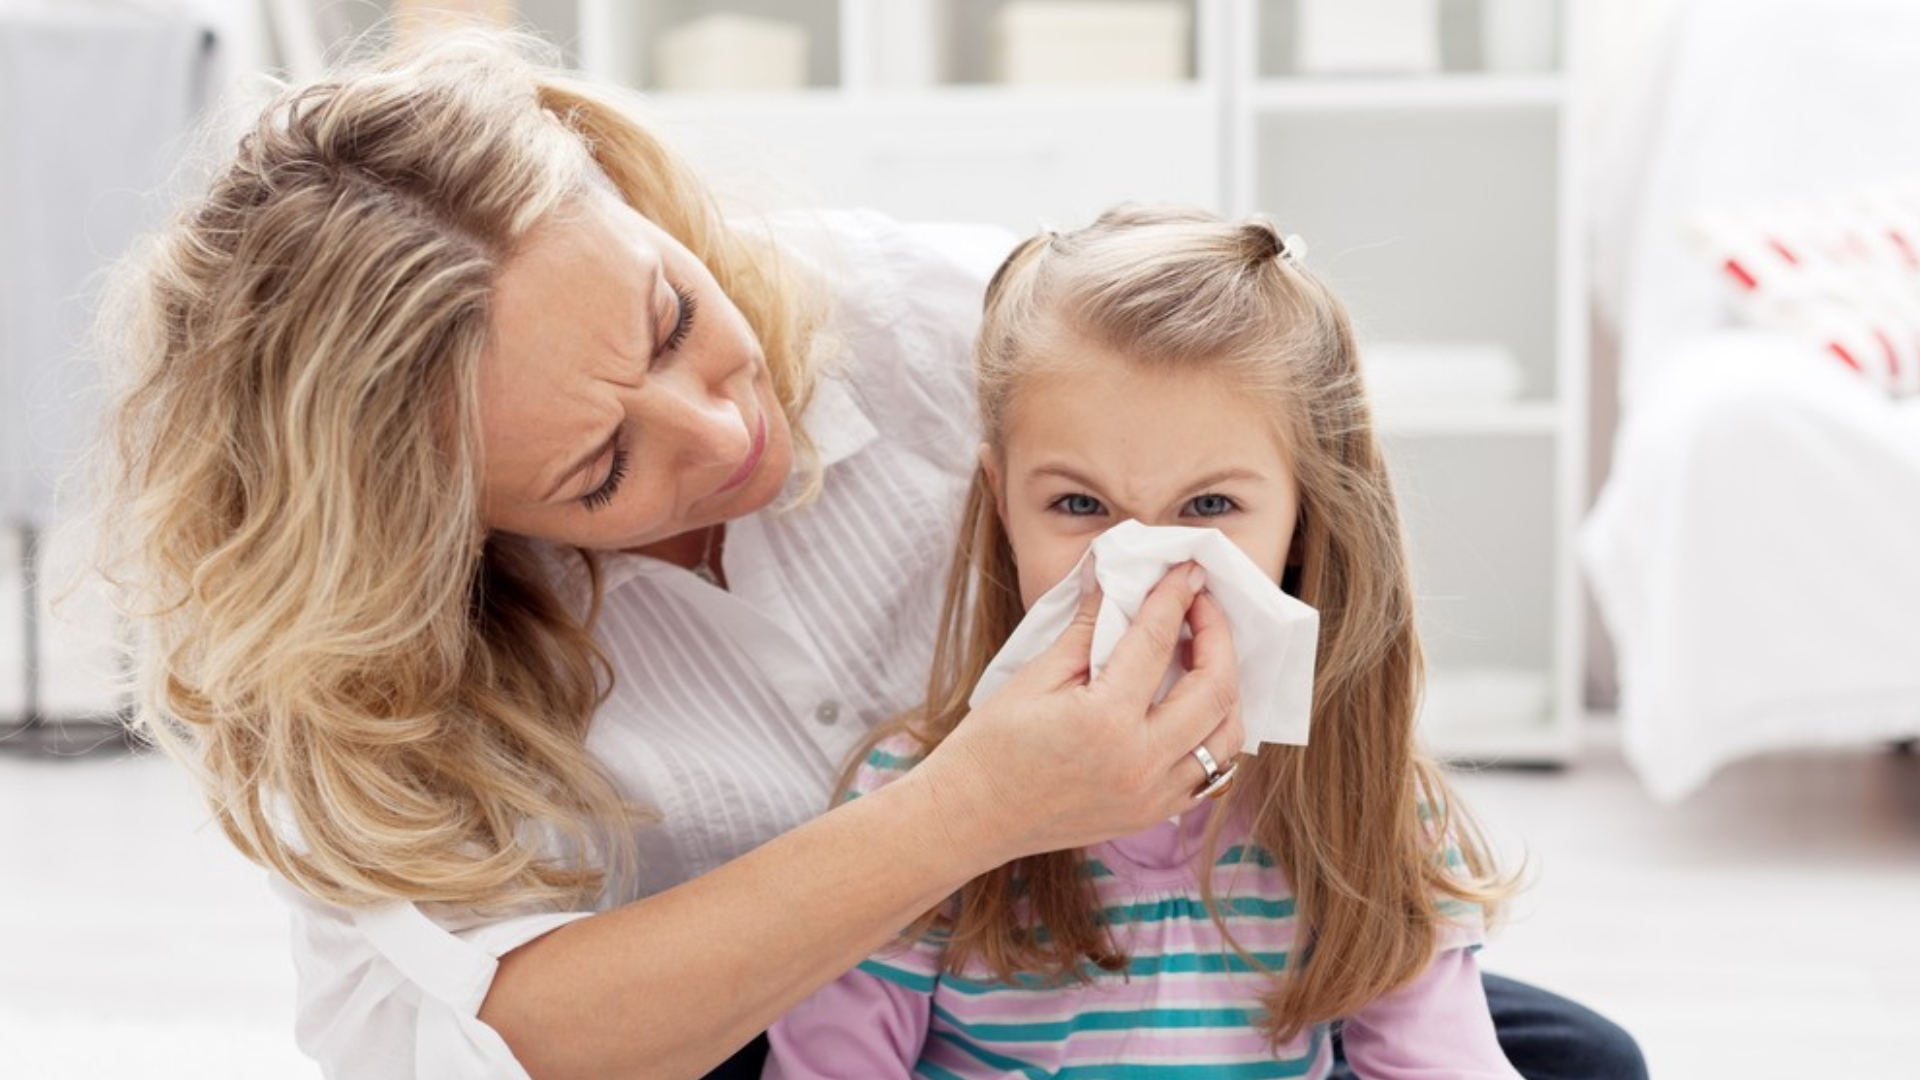 How to best protect your kids this cold and flu season